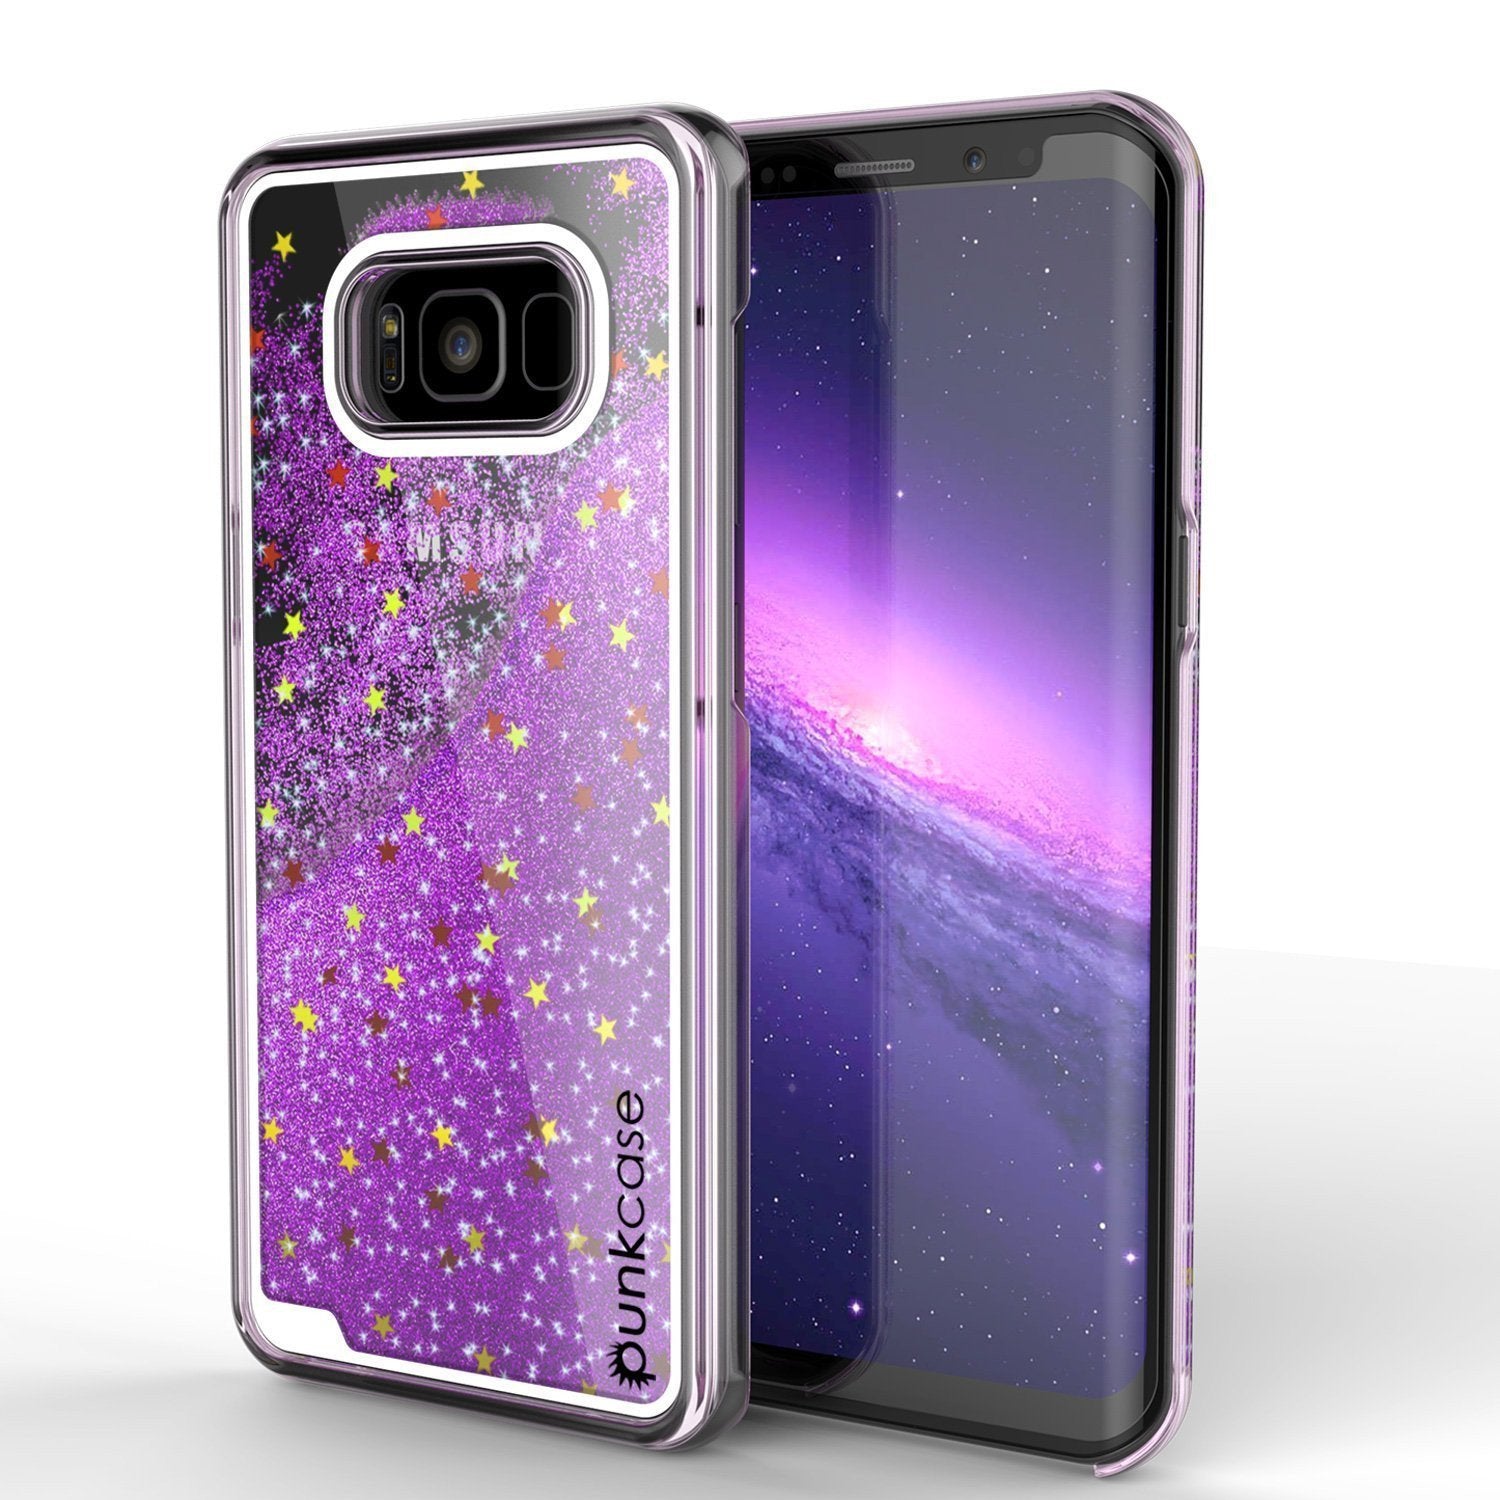 Galaxy S8 Case, Punkcase [Liquid Series] Protective Dual Layer Floating Glitter Cover with lots of Bling & Sparkle + PunkShield Screen Protector for Samsung S8 [Purp